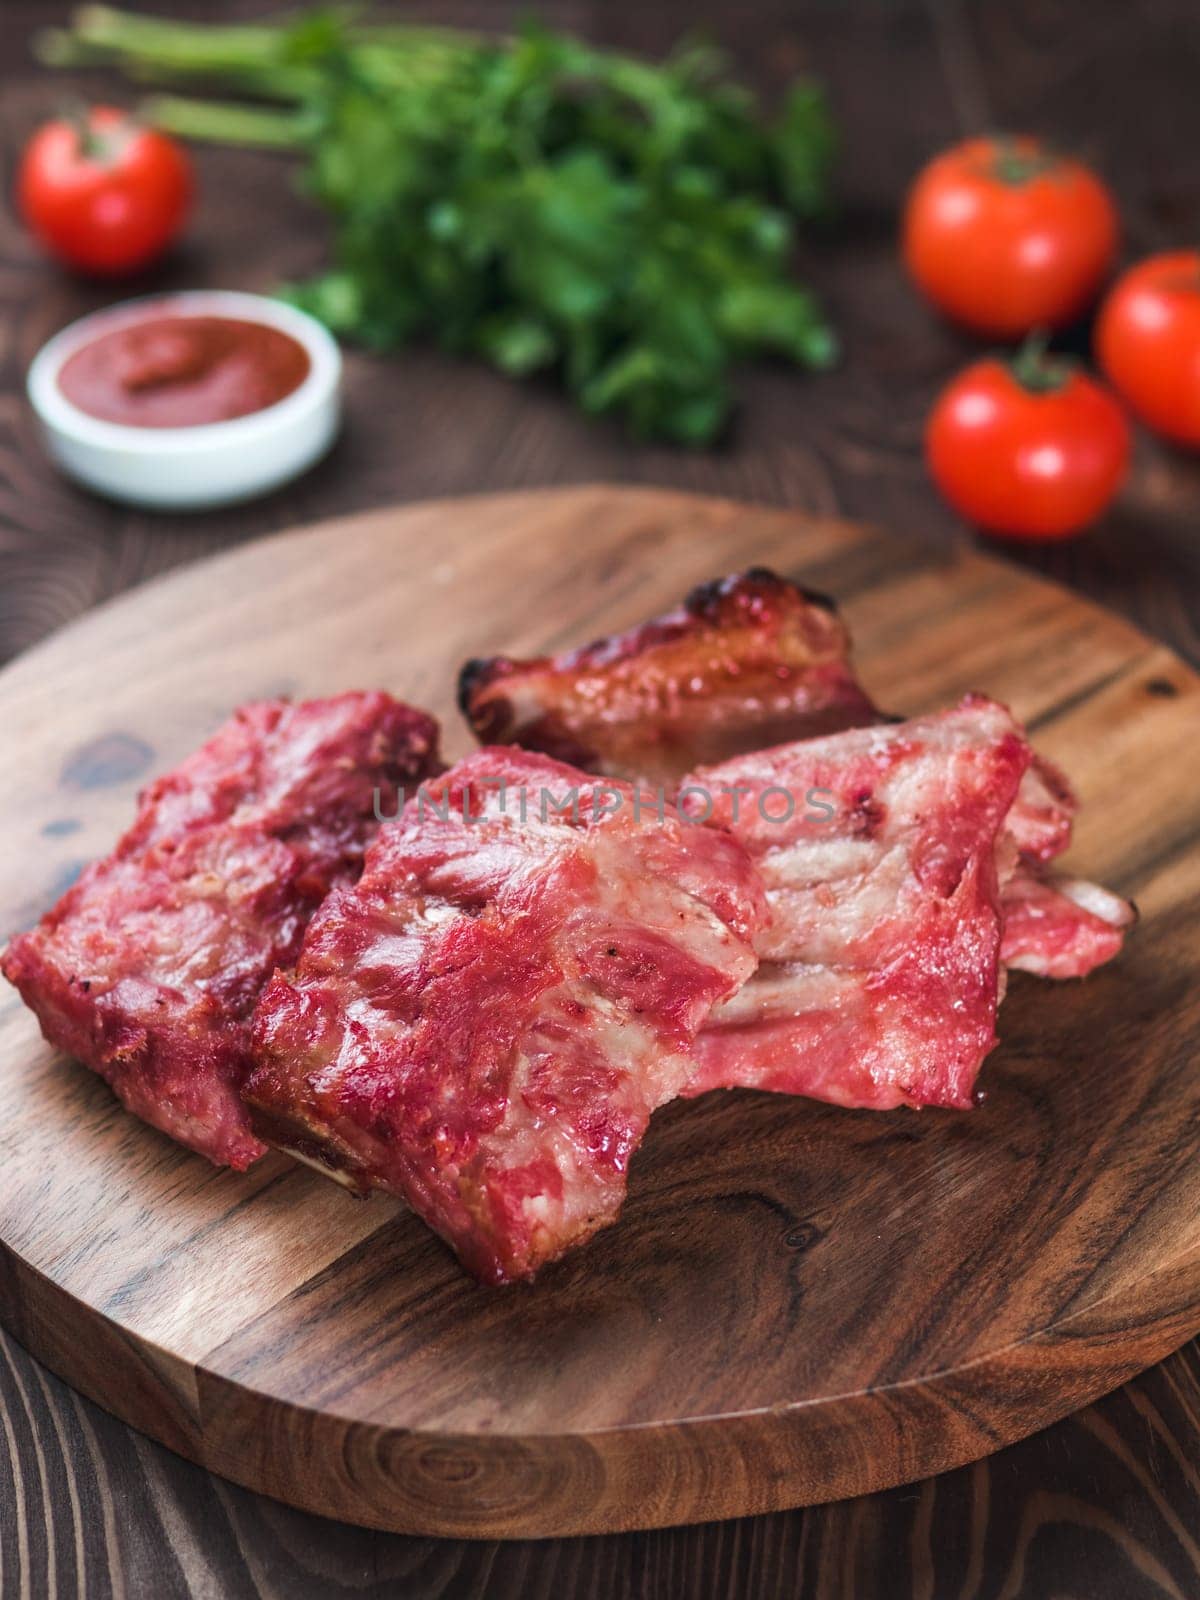 pork ribs on wooden plate. Ready-to-eat pork ribs. Selective focus. Copy space. Vertical